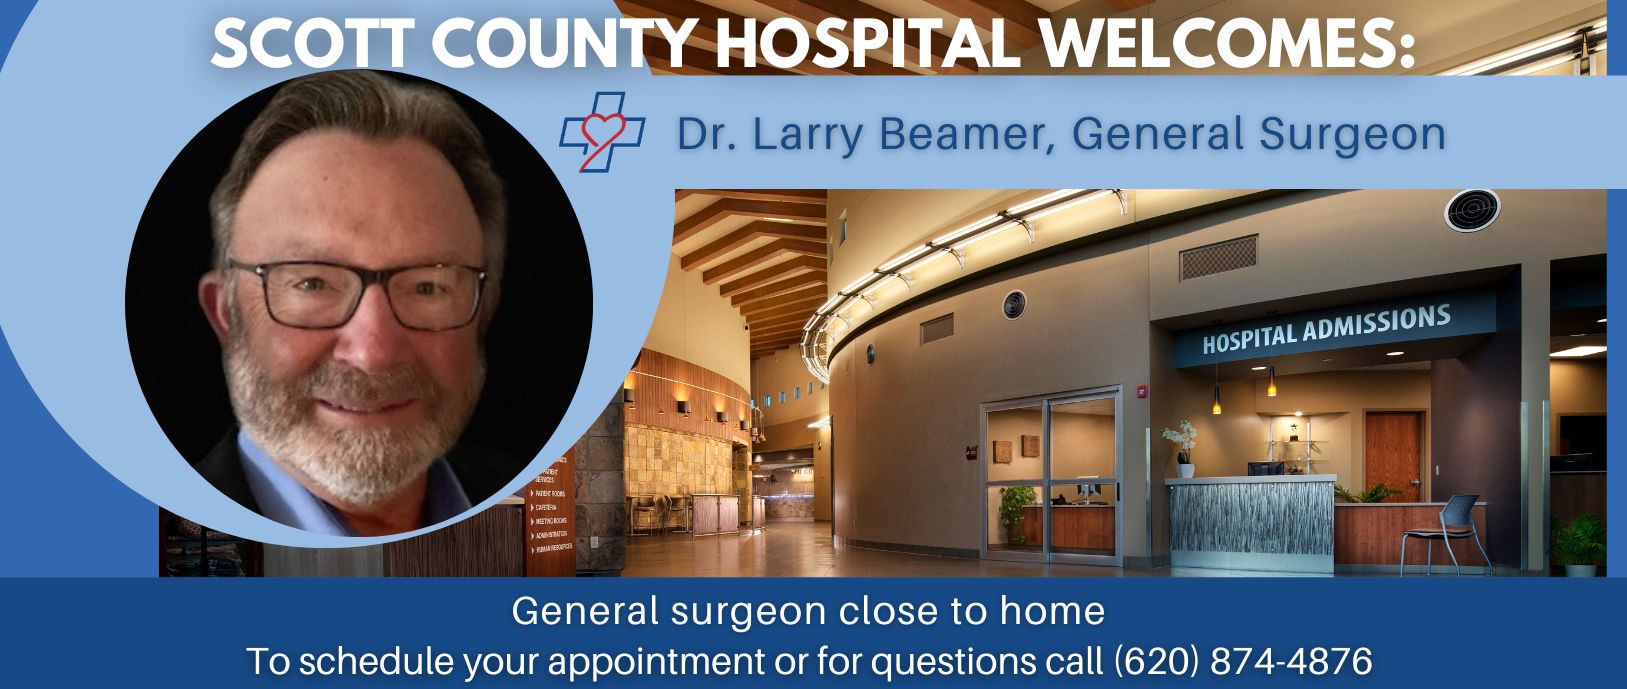 Scott County Hospital welcomes, Dr.Larry Beamer; General Surgeon
General Surgeon close to home to schedule your appointment or for questions call (620)874-4876